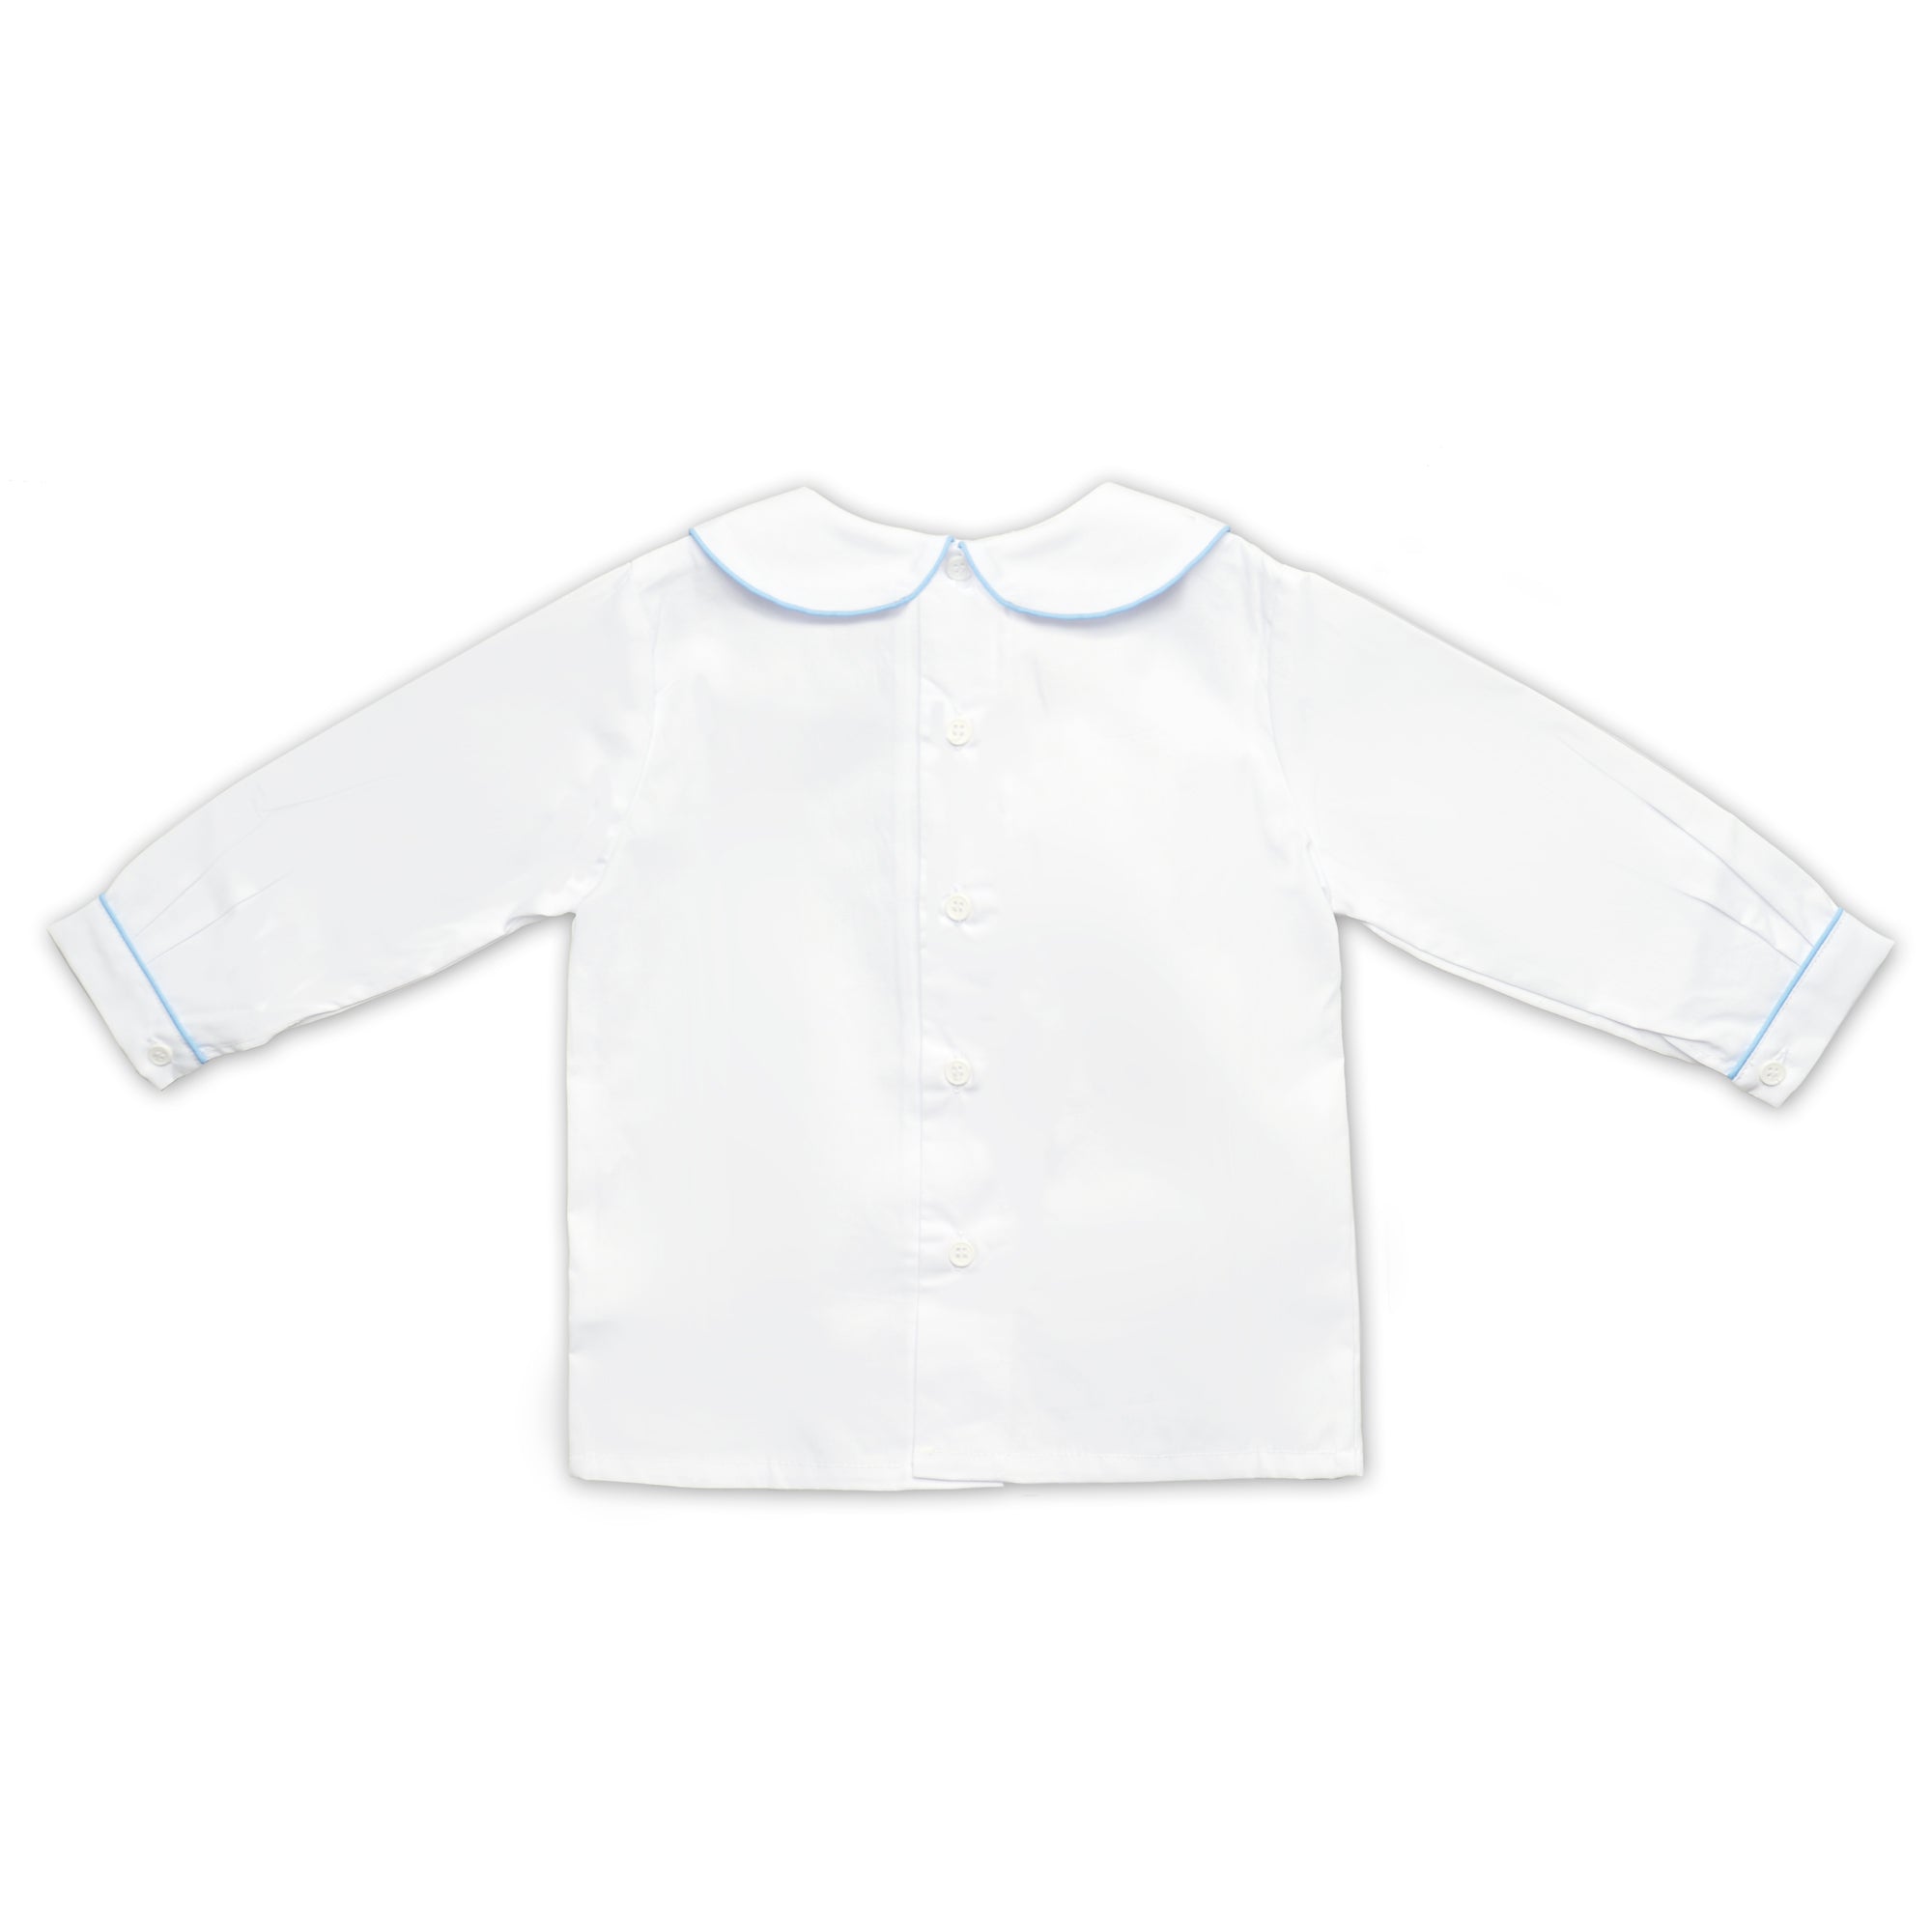 Boys White Collared Long Sleeve Shirt With Pale Blue Trim - Cou Cou Baby